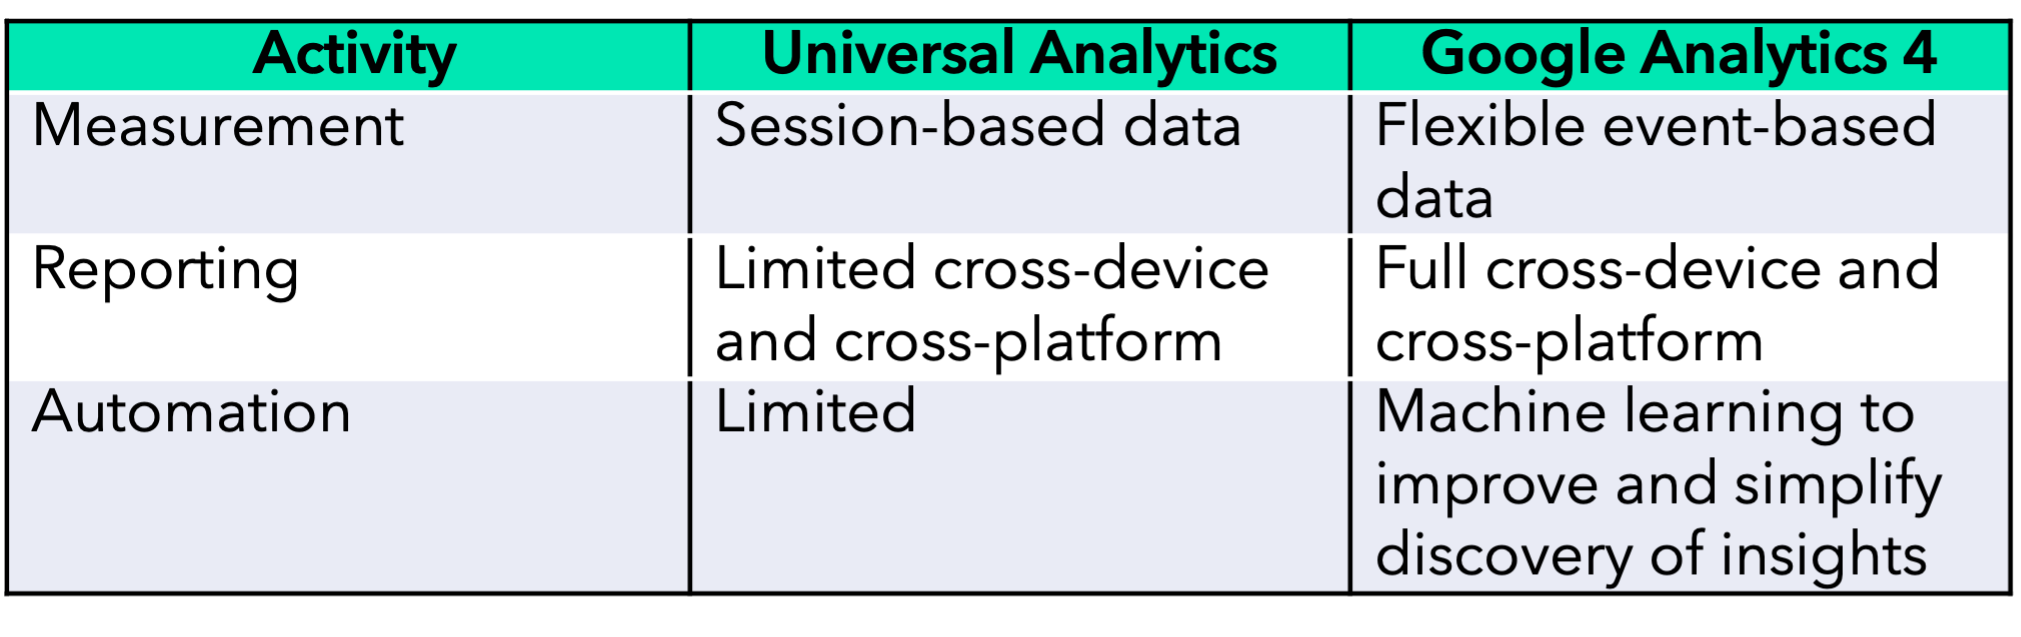 Table highlighting the differences between Universal Analytics and Google Analytics 4